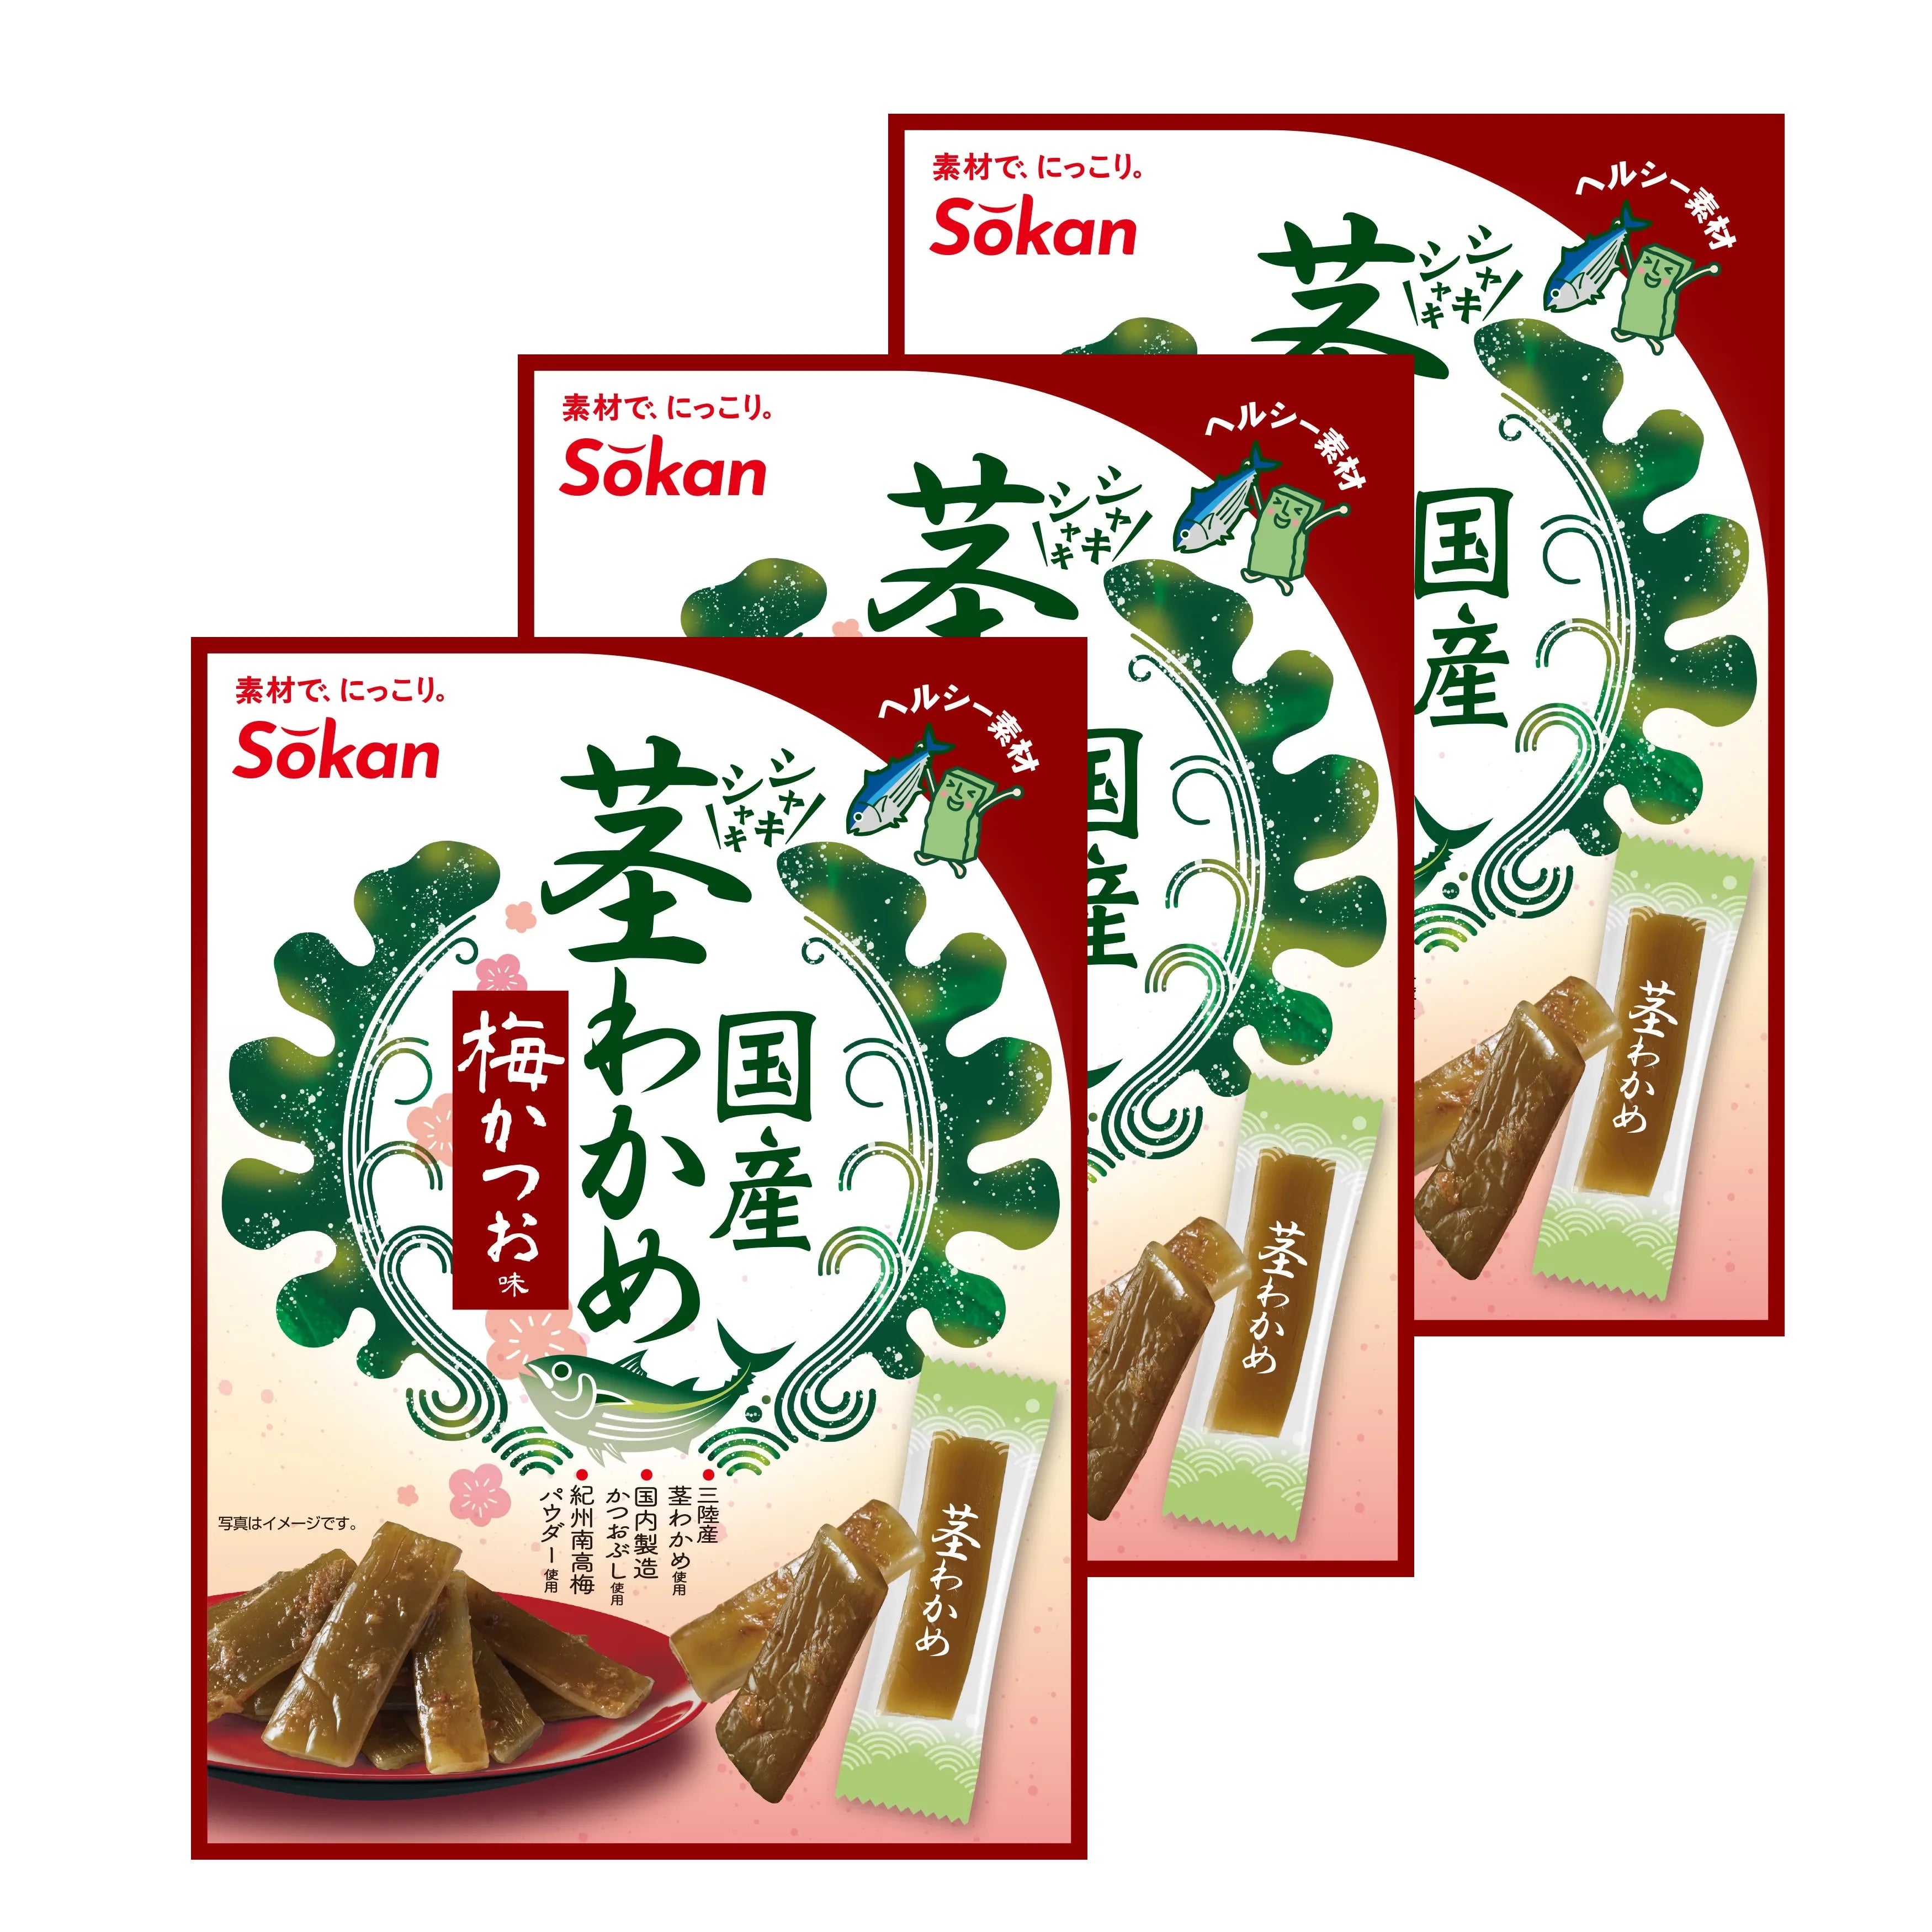 Ume-Plum-and-Bonito-Flavored-Wakame-Stems-Seaweed-Snack-63g--Pack-of-3--1-2024-06-05T04:57:14.567Z.webp